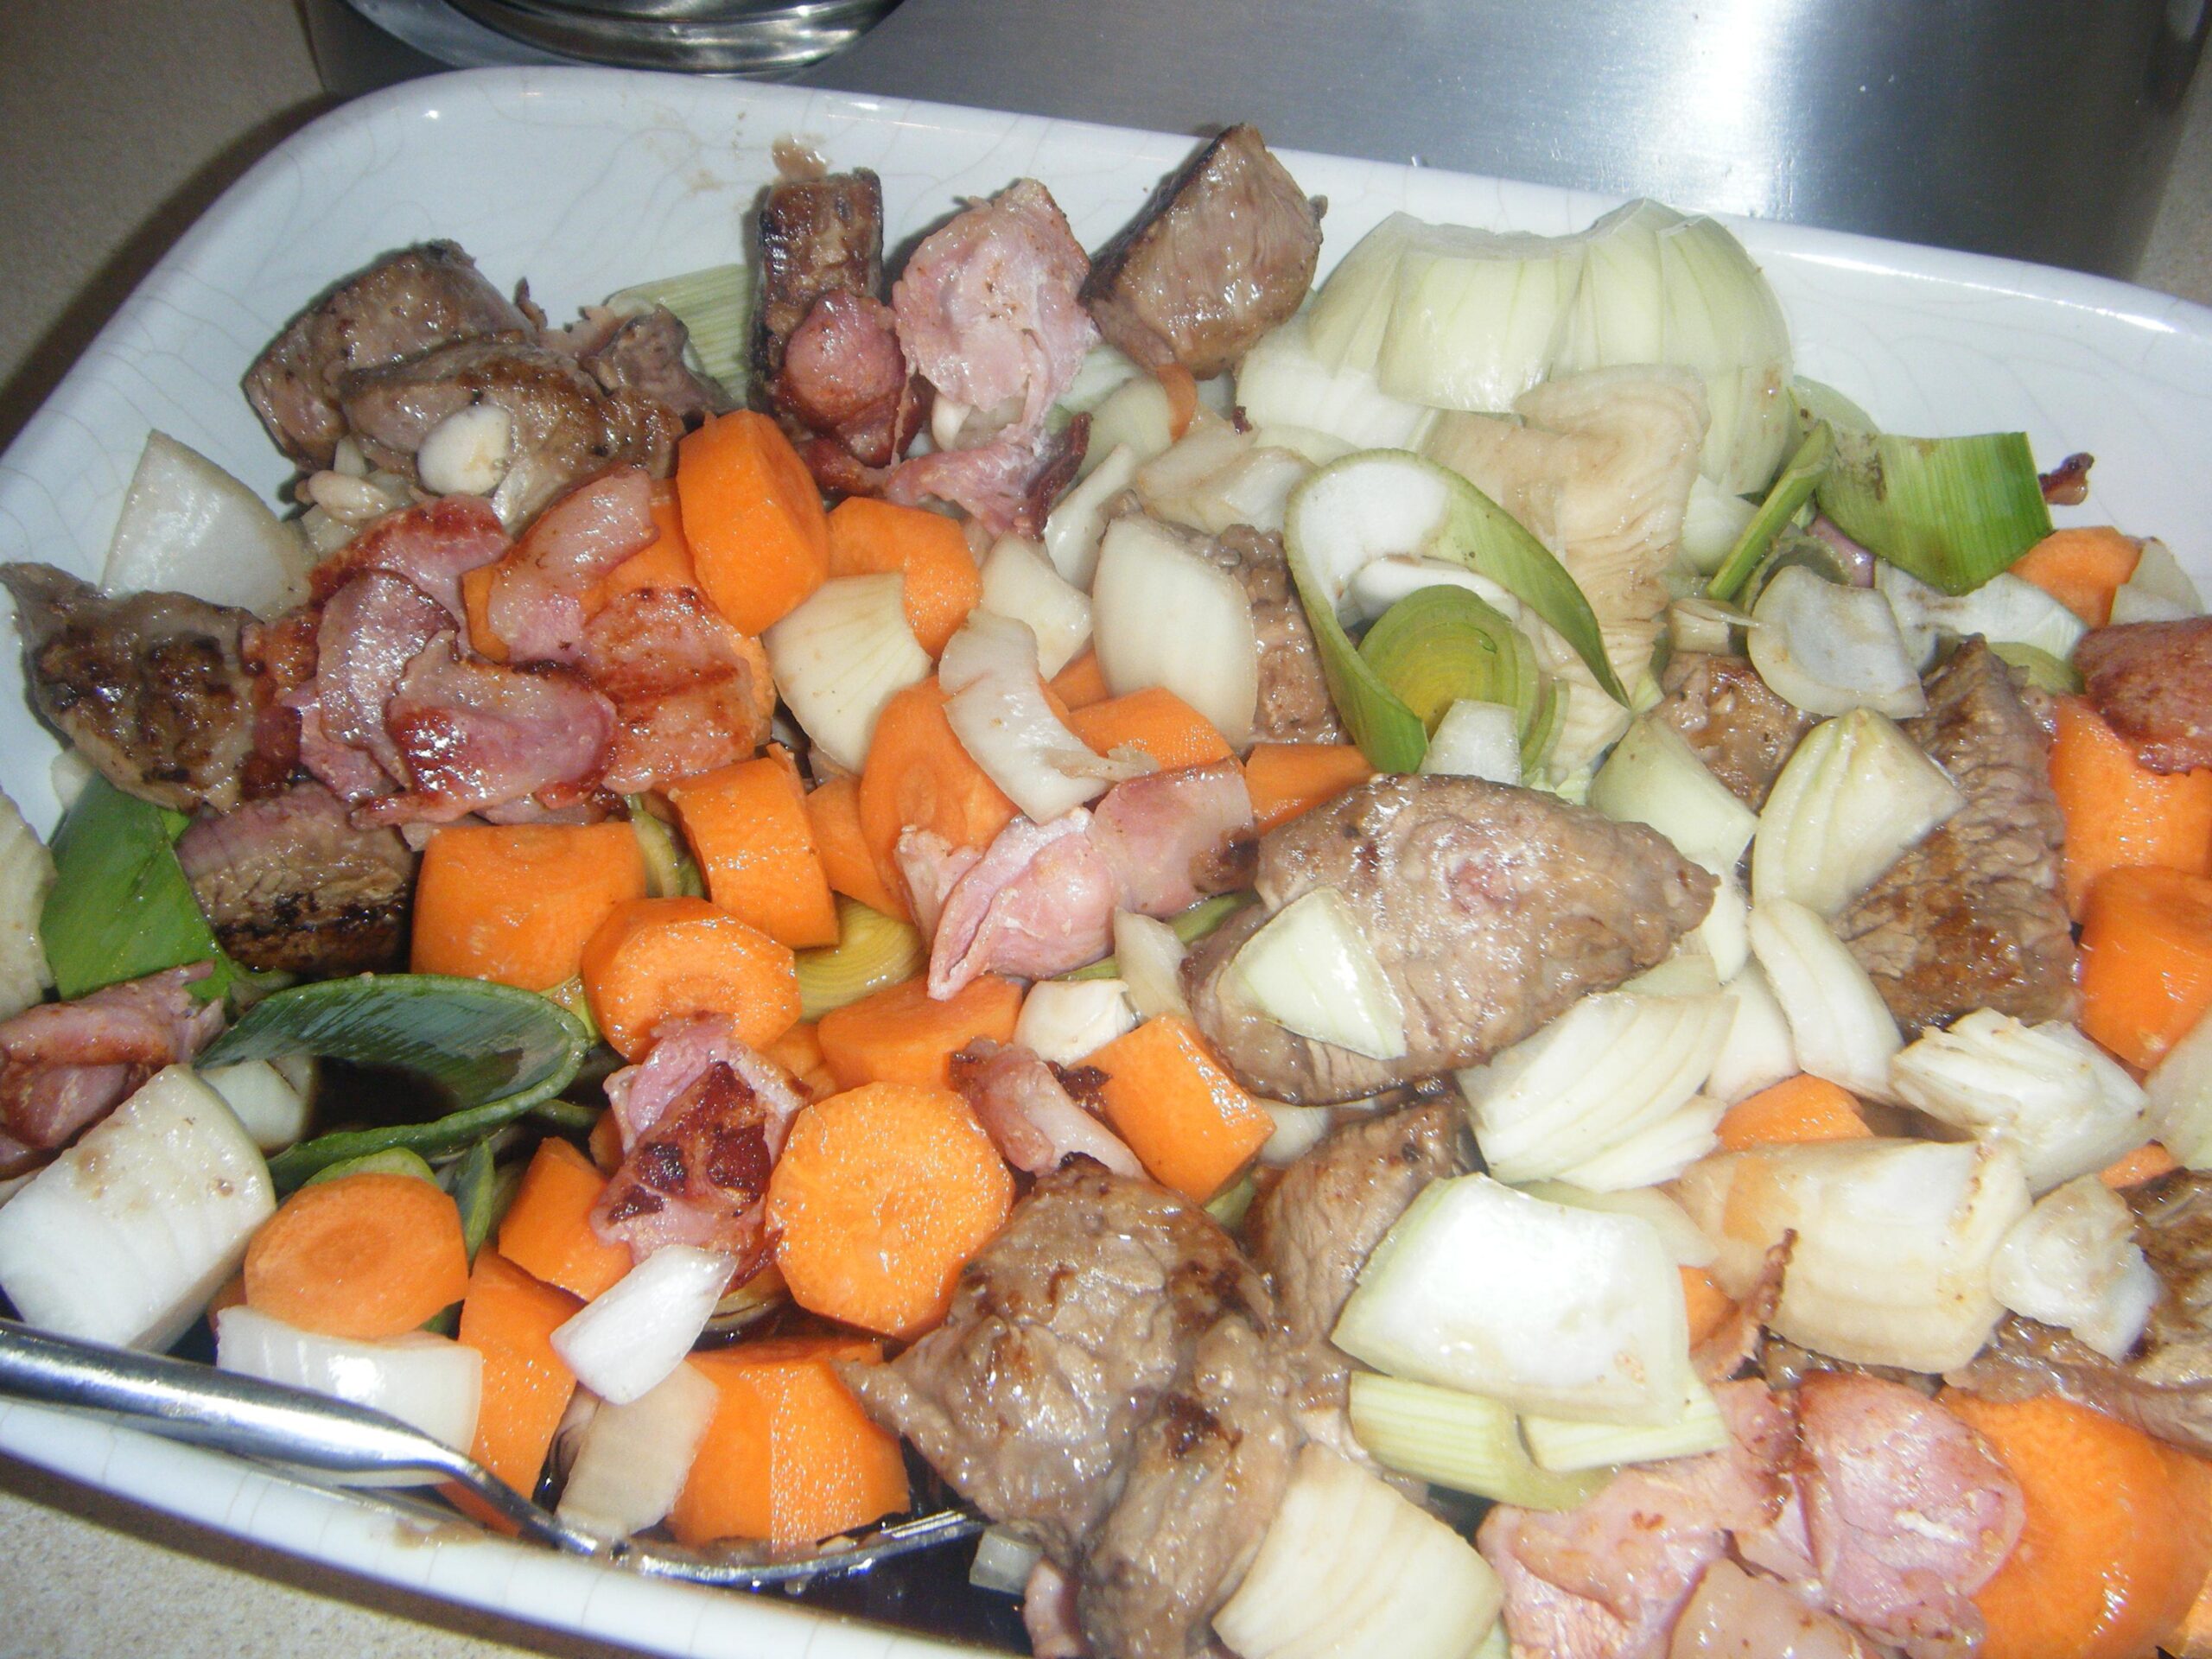 Delicious Irish Stew Recipe with a Guinness Twist